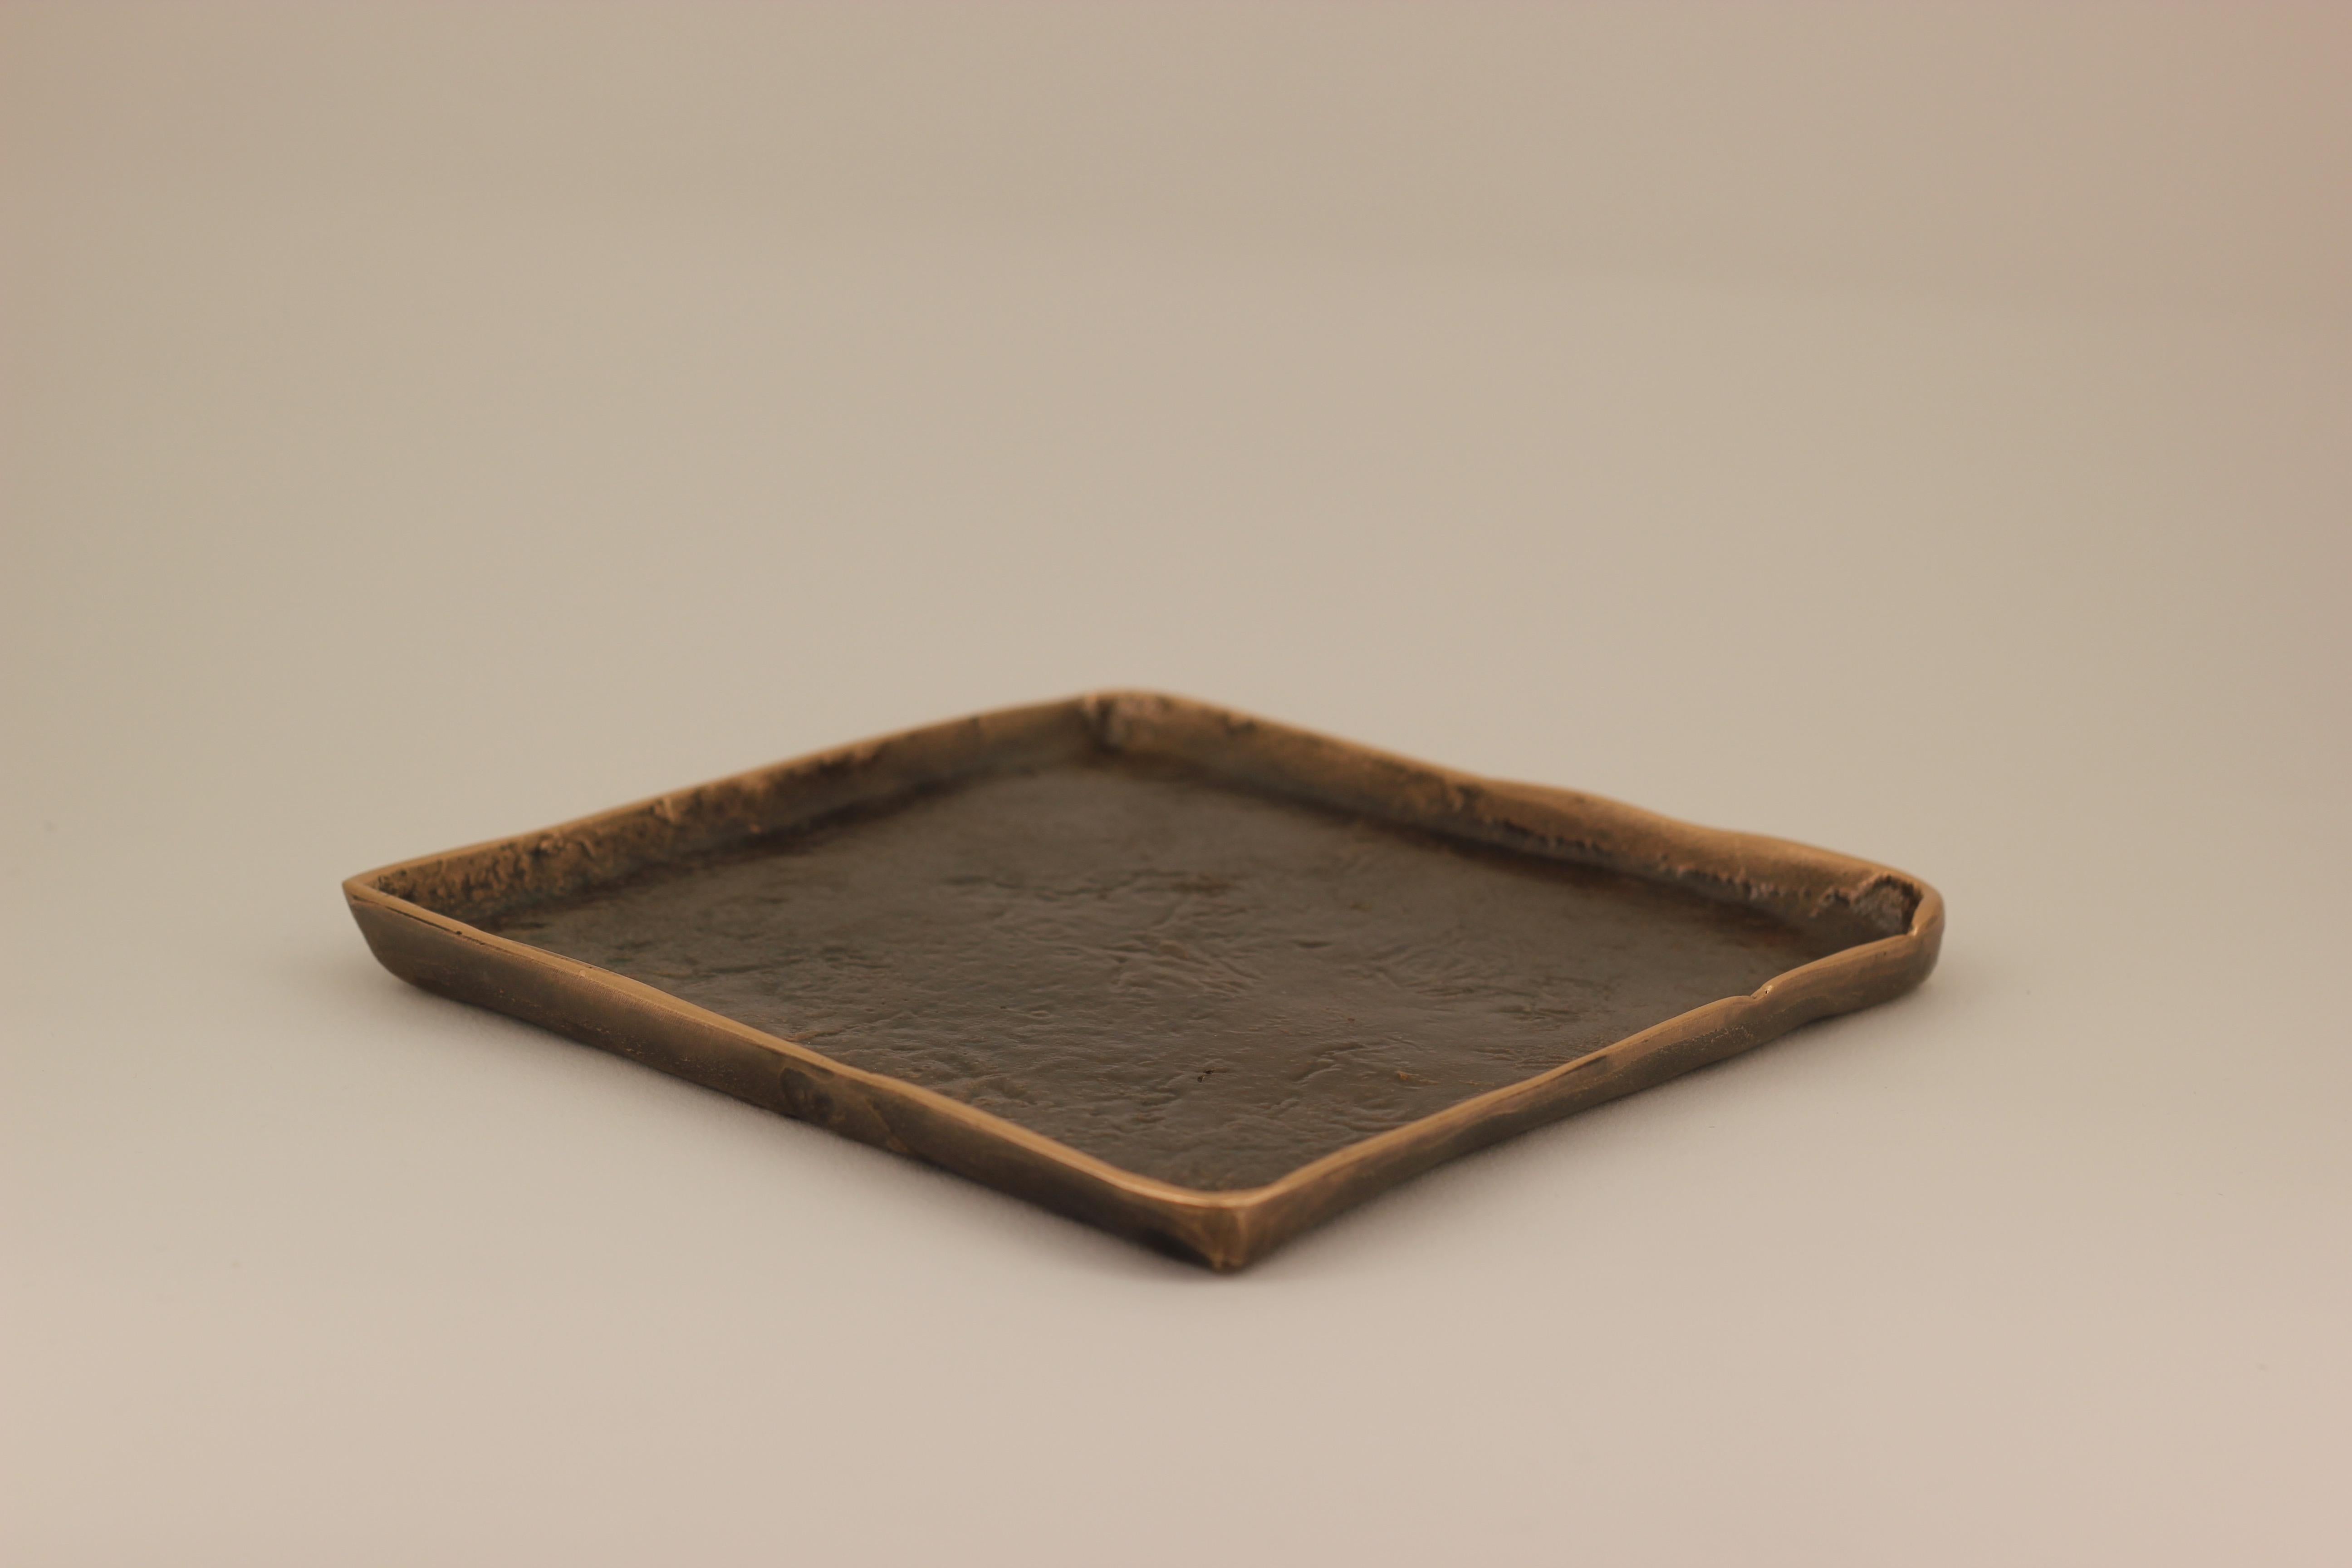 Graceful bronze tray, vide-poche, inspired by Wabi-Sabi, the ancient Japanese philosophy that views and embraces the world for its imperfections and transient nature. It translates into an exquisite aesthetic that is imperfect and incomplete, yet